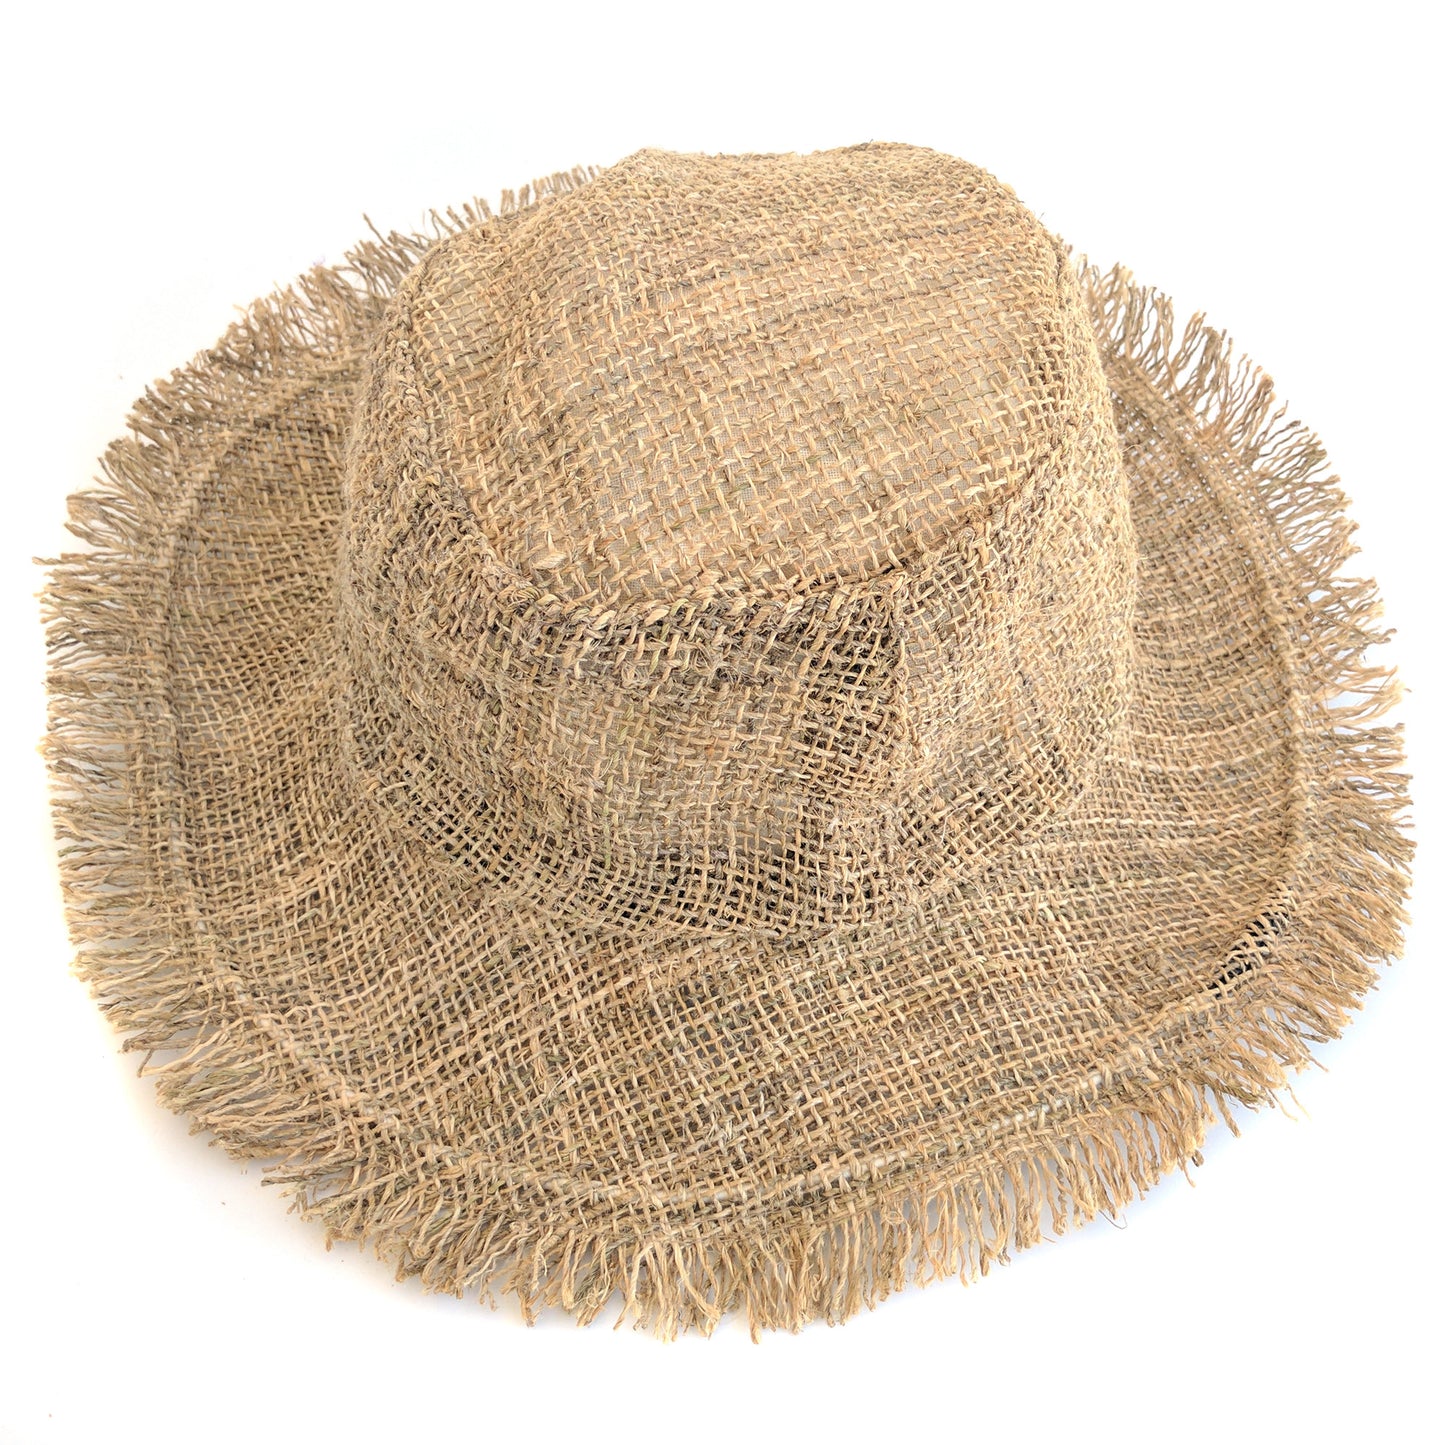 HEMP Hat made from 100% natural, organic and eco-friendly handwoven HEMP